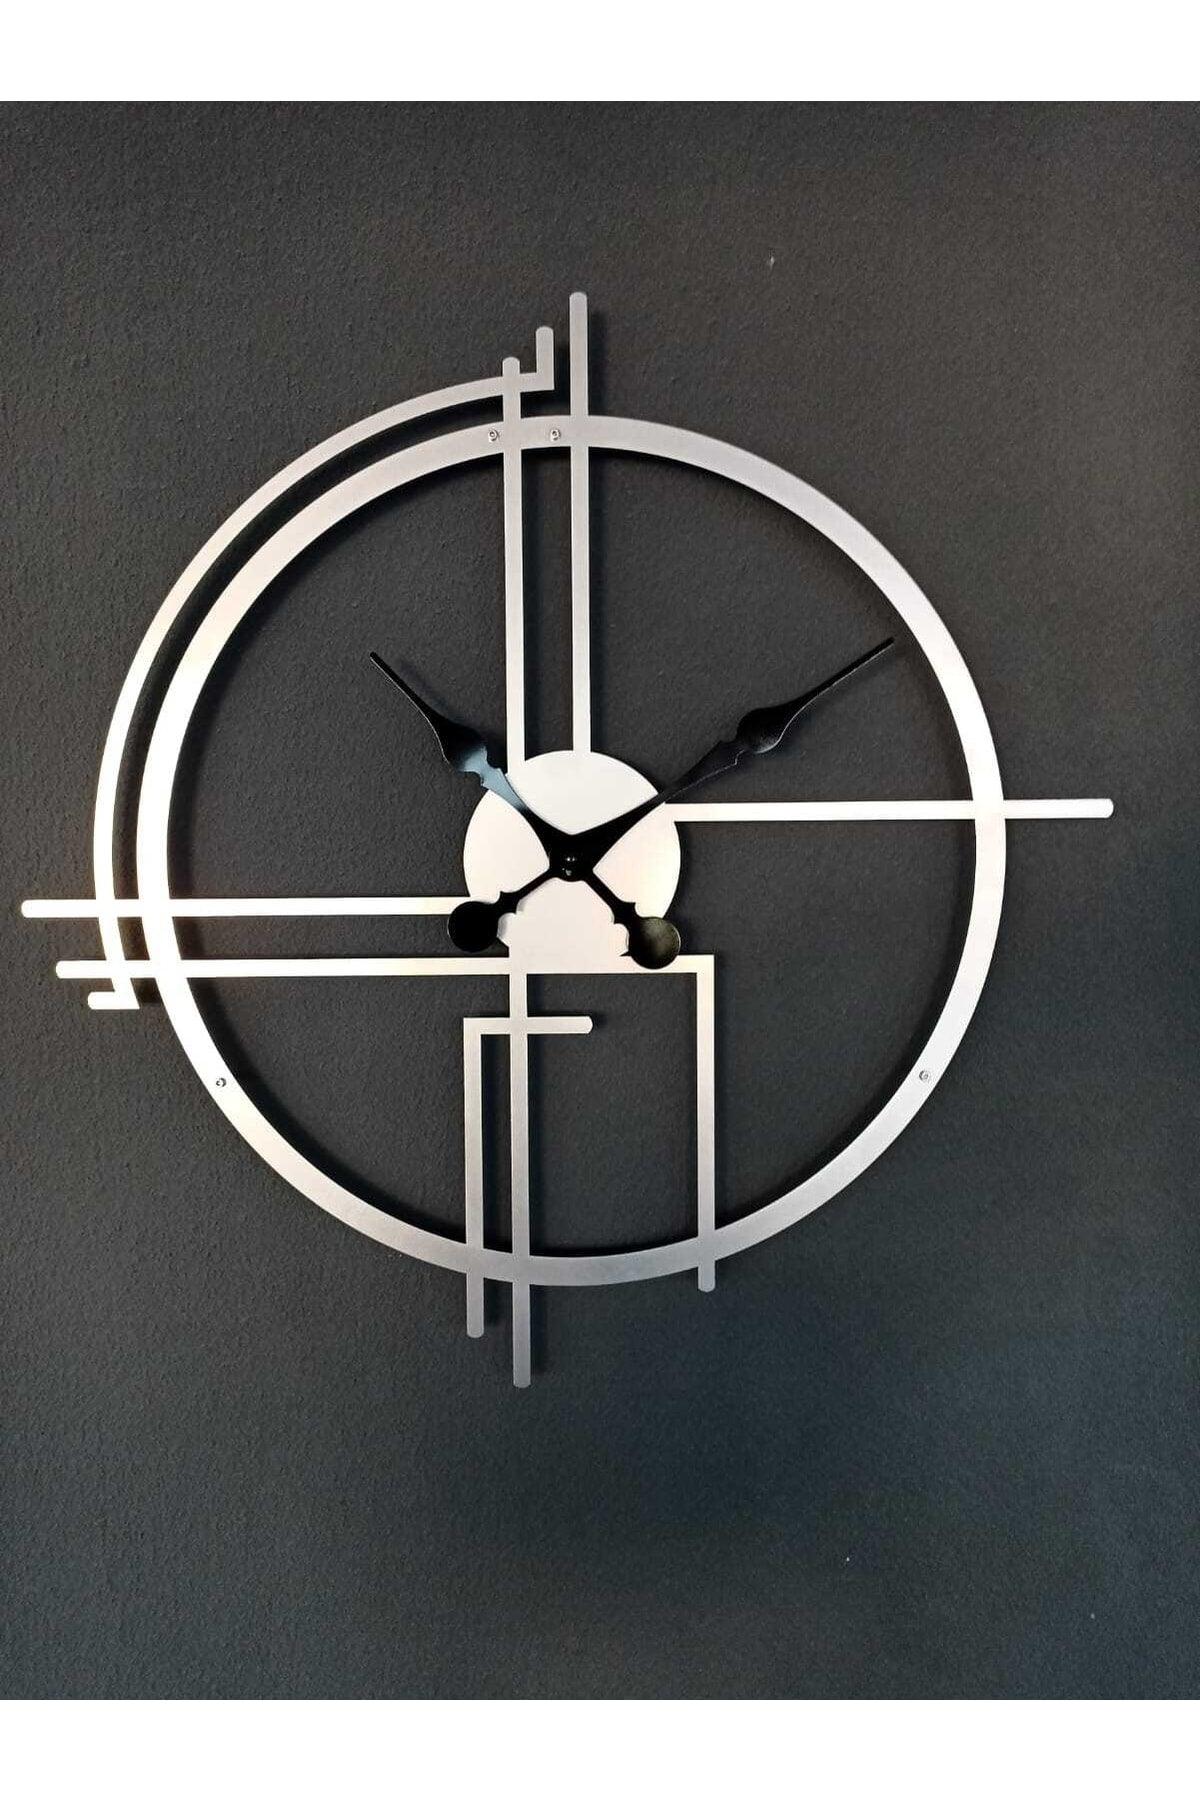 Querencia Metal Silver / Silver Wall Clock 1.5 Mm Thickness 60x60 Cm - Swordslife